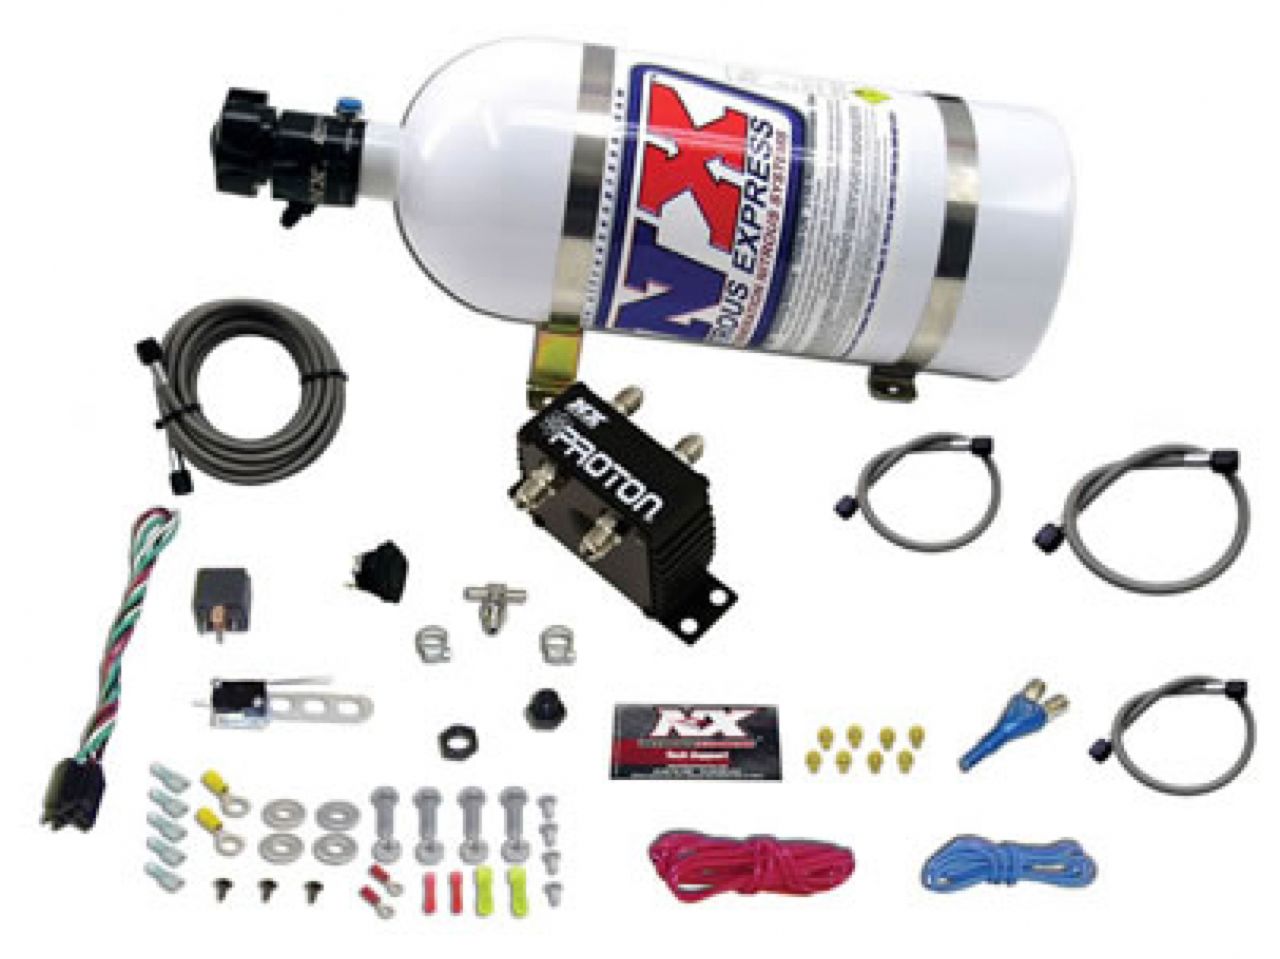 Nitrous Express Nitrous Oxide Kits and Accessories 20421-05 Item Image